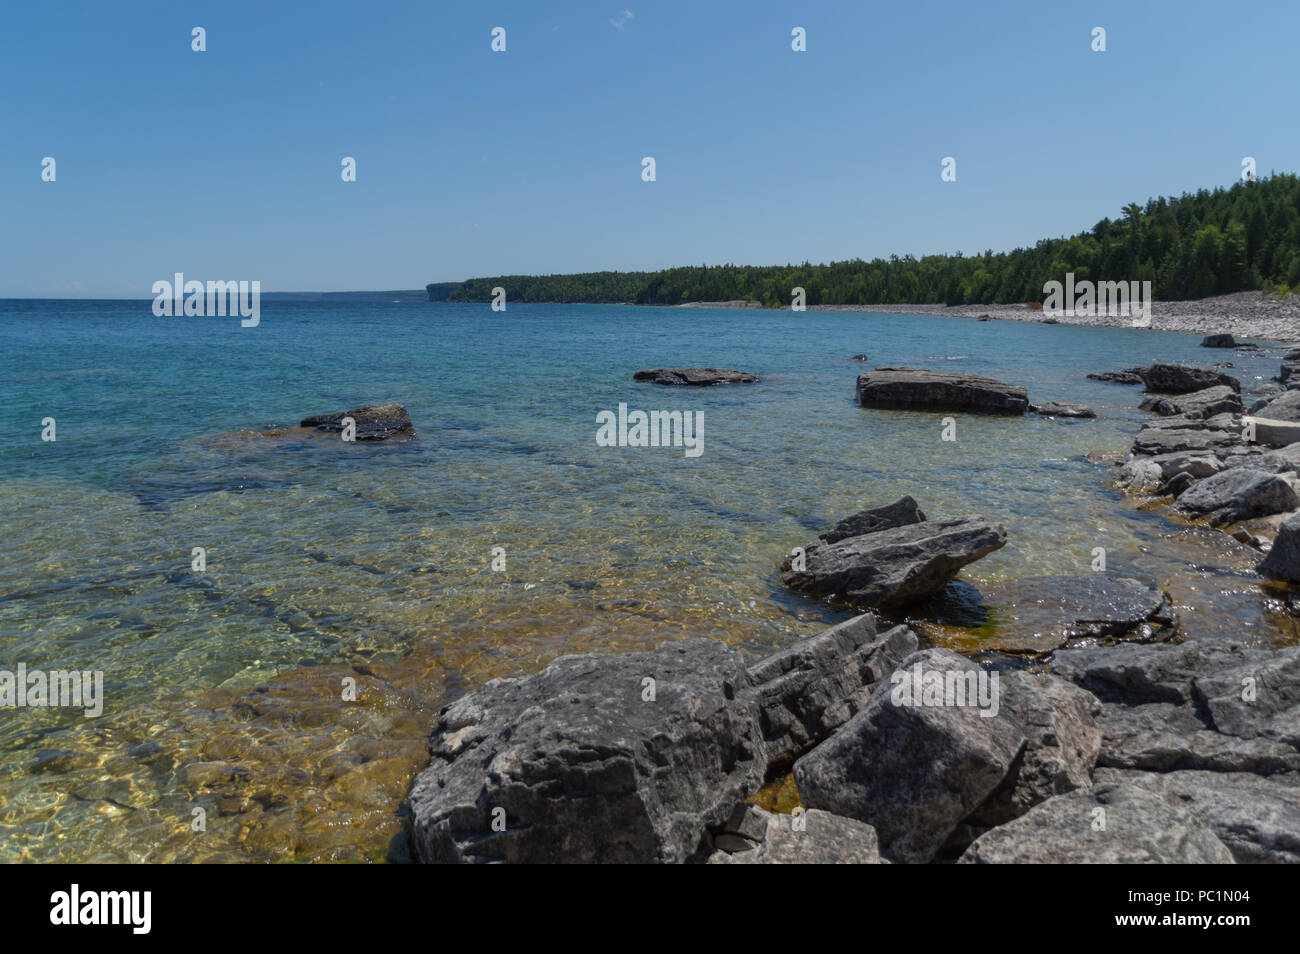 Bright clear aqua green water on Bruce Peninsula. Crystal clear water shows limestone rocks.  Cedar trees and conifers. Stock Photo